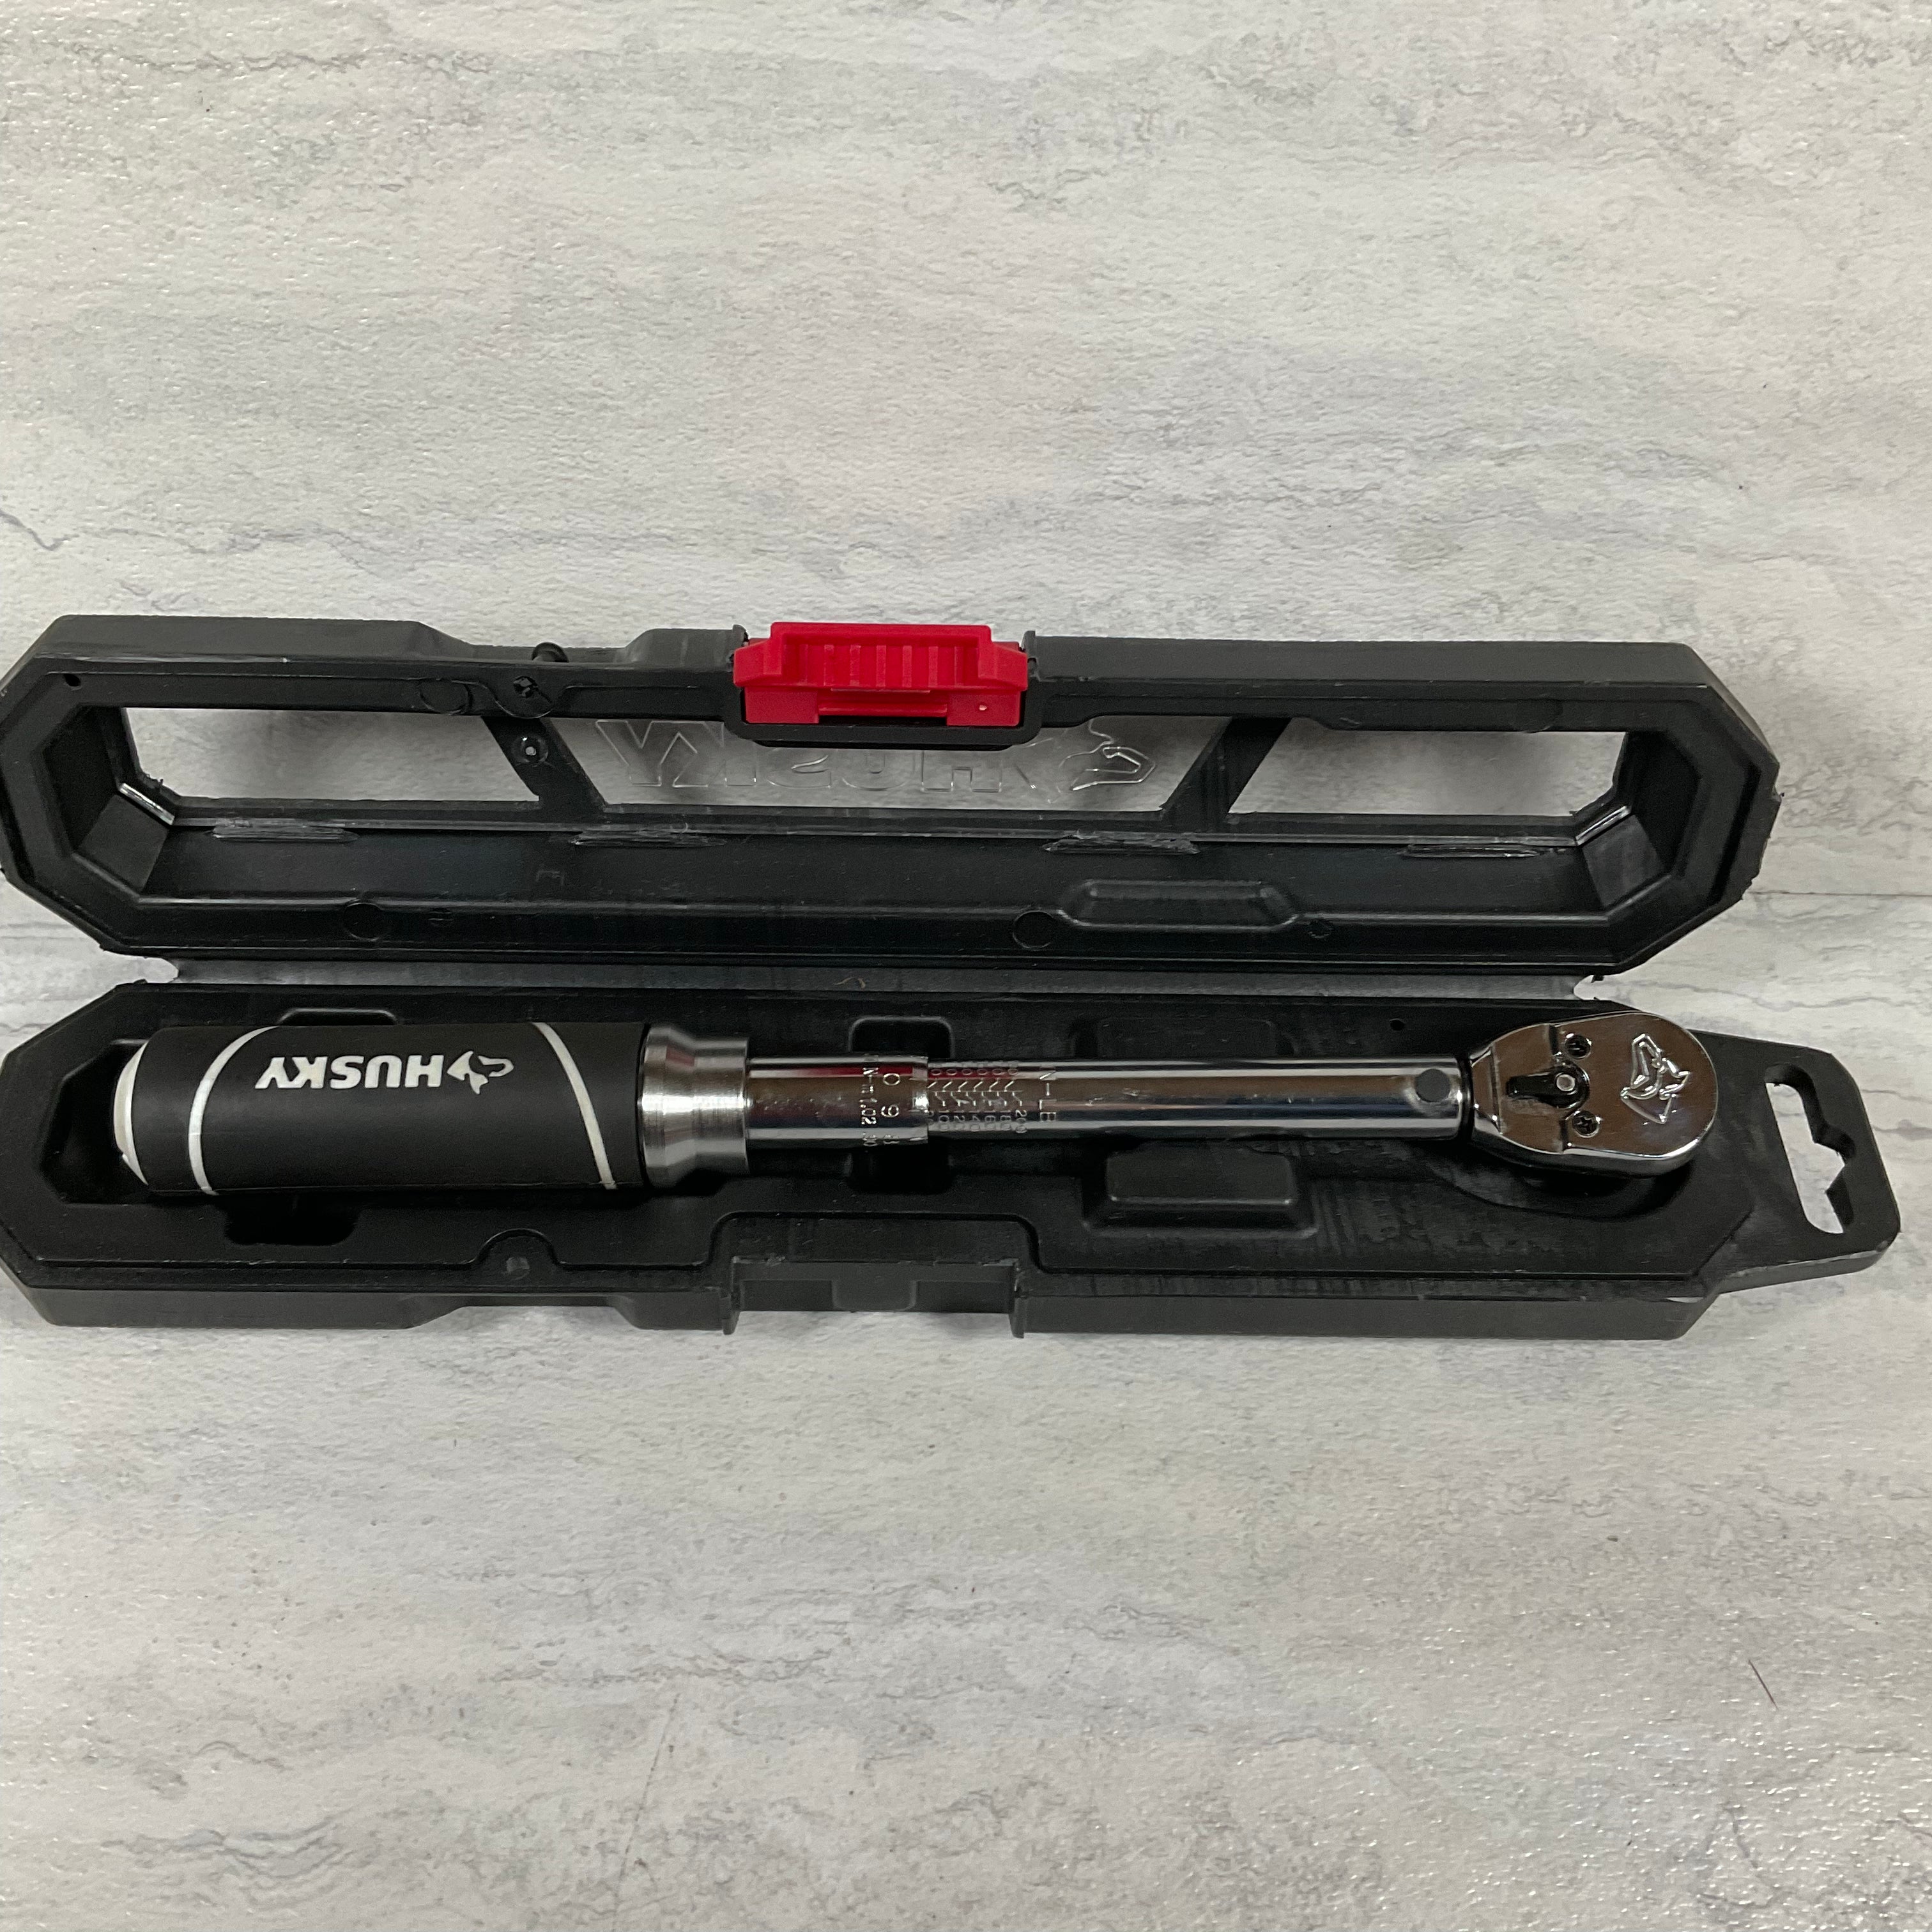 HUSKY Torque Wrench 40-200 in lbs 1/4